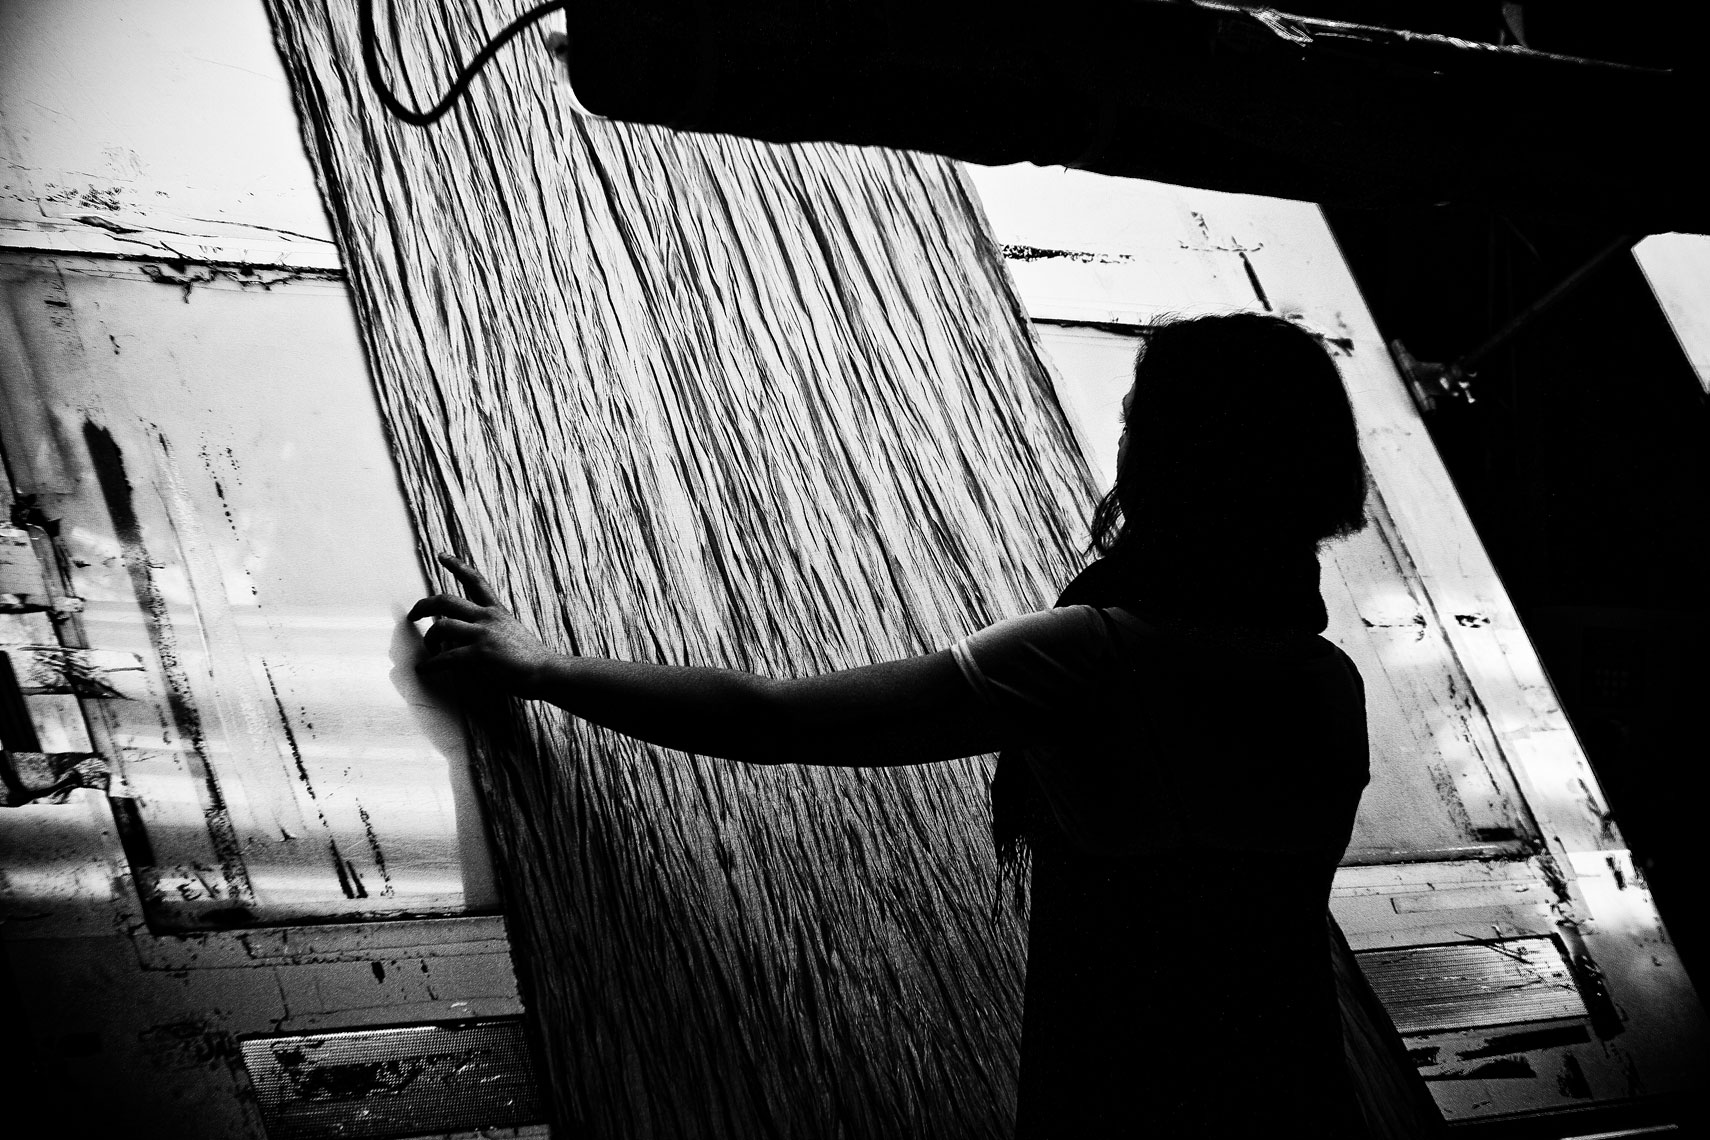 ITALY. Prato, 31st March 2009. A worker checks the quality of a fabric on a so-called "mirror".